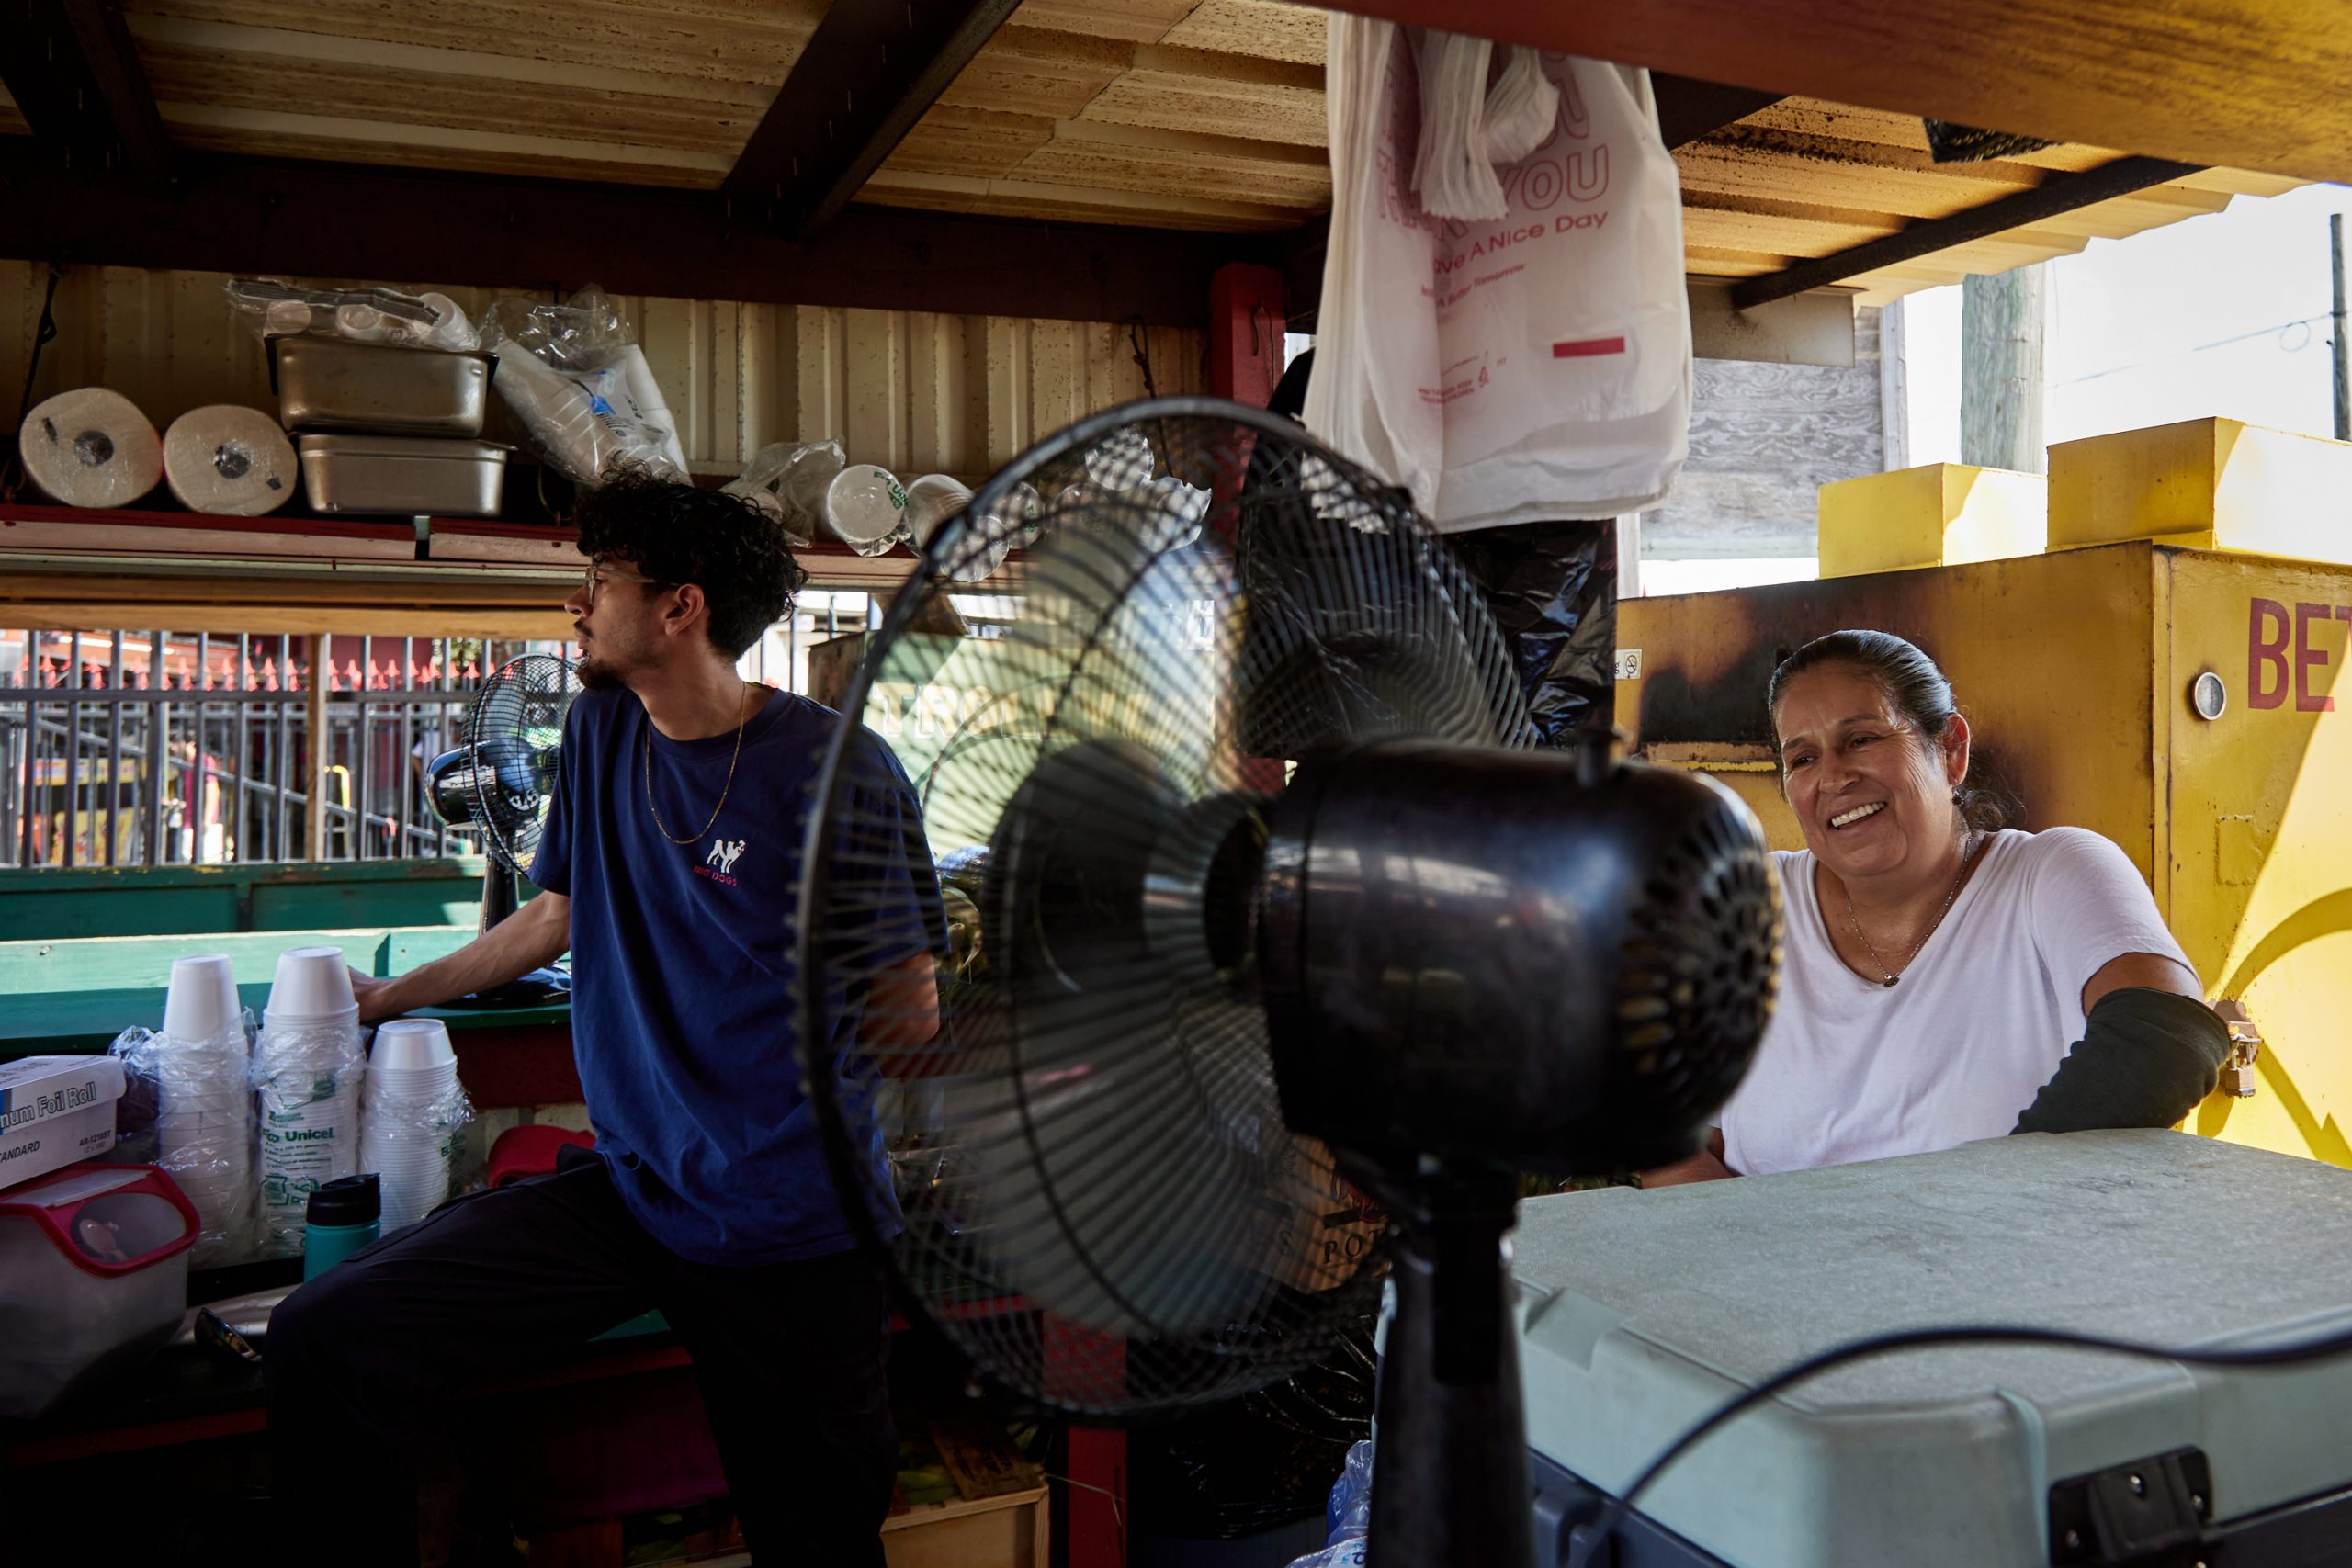 Alberto Yañez, left, and Maria Yañez stands near the heat of an oven and in front of a fan